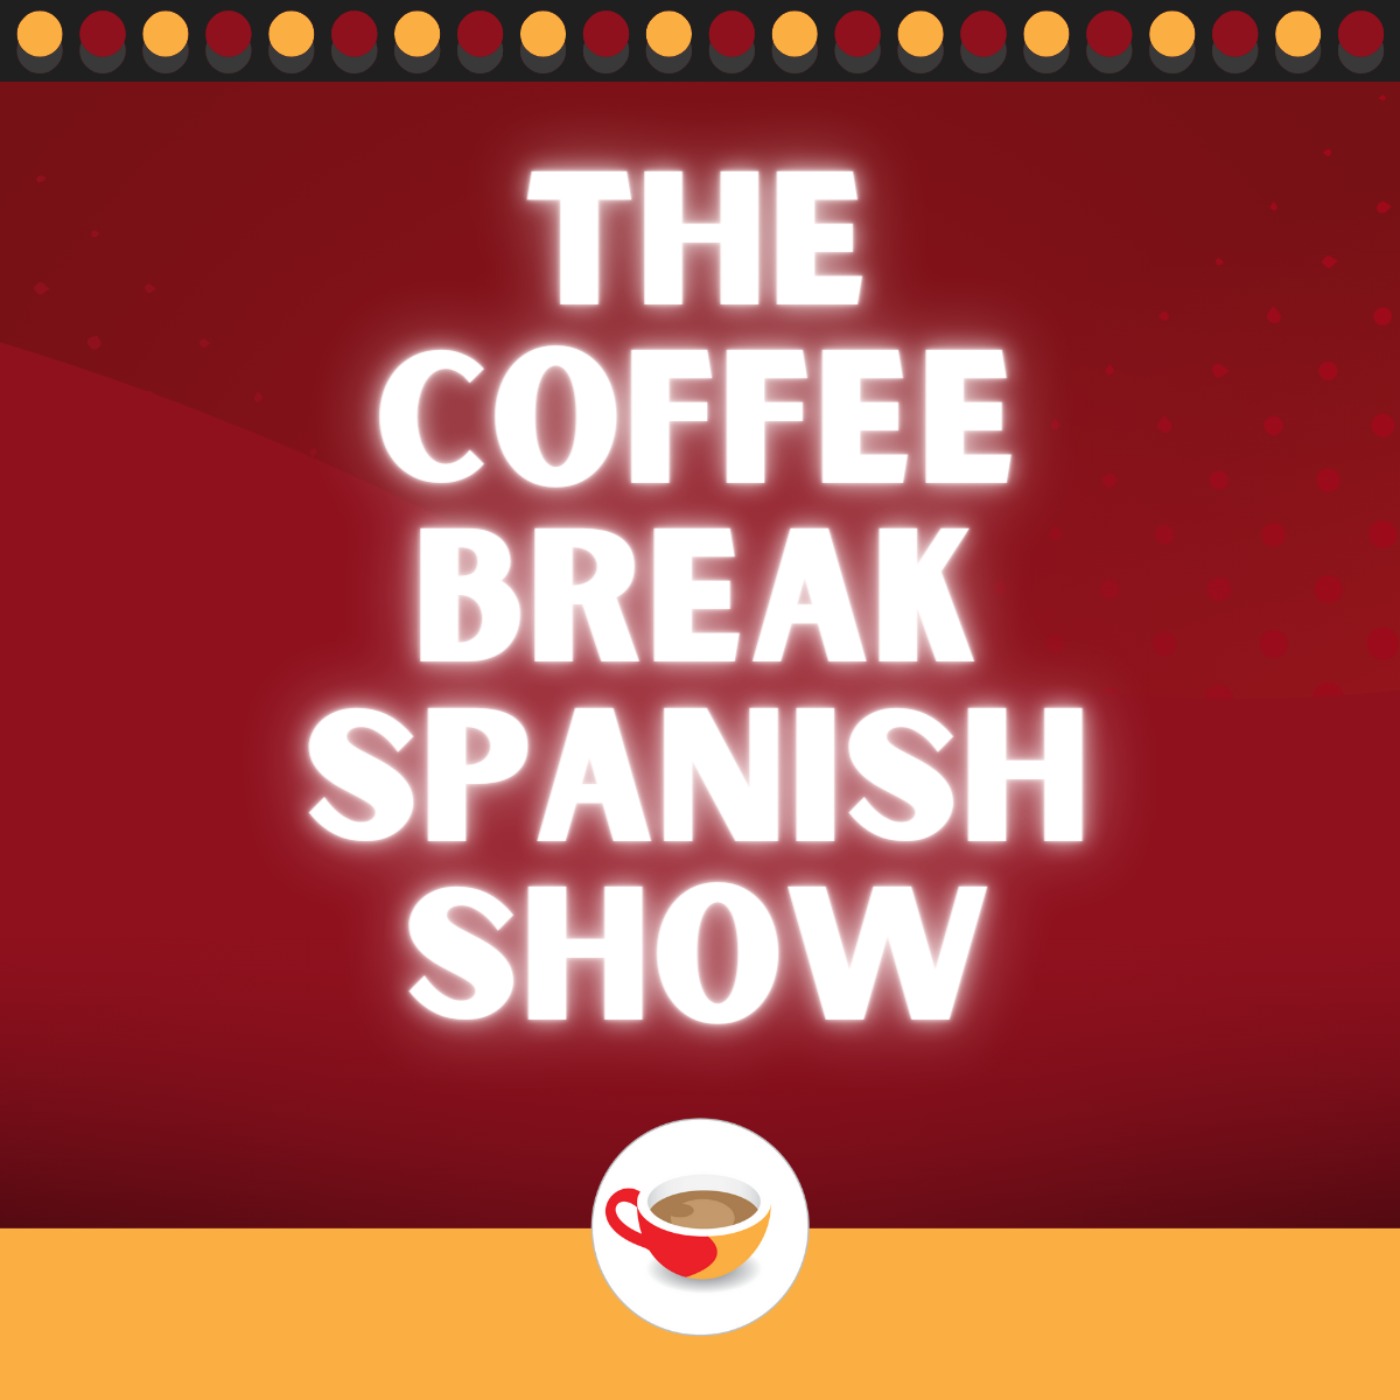 How to expand your vocabulary - 3 useful Spanish suffixes | The Coffee Break Spanish Show 1.10